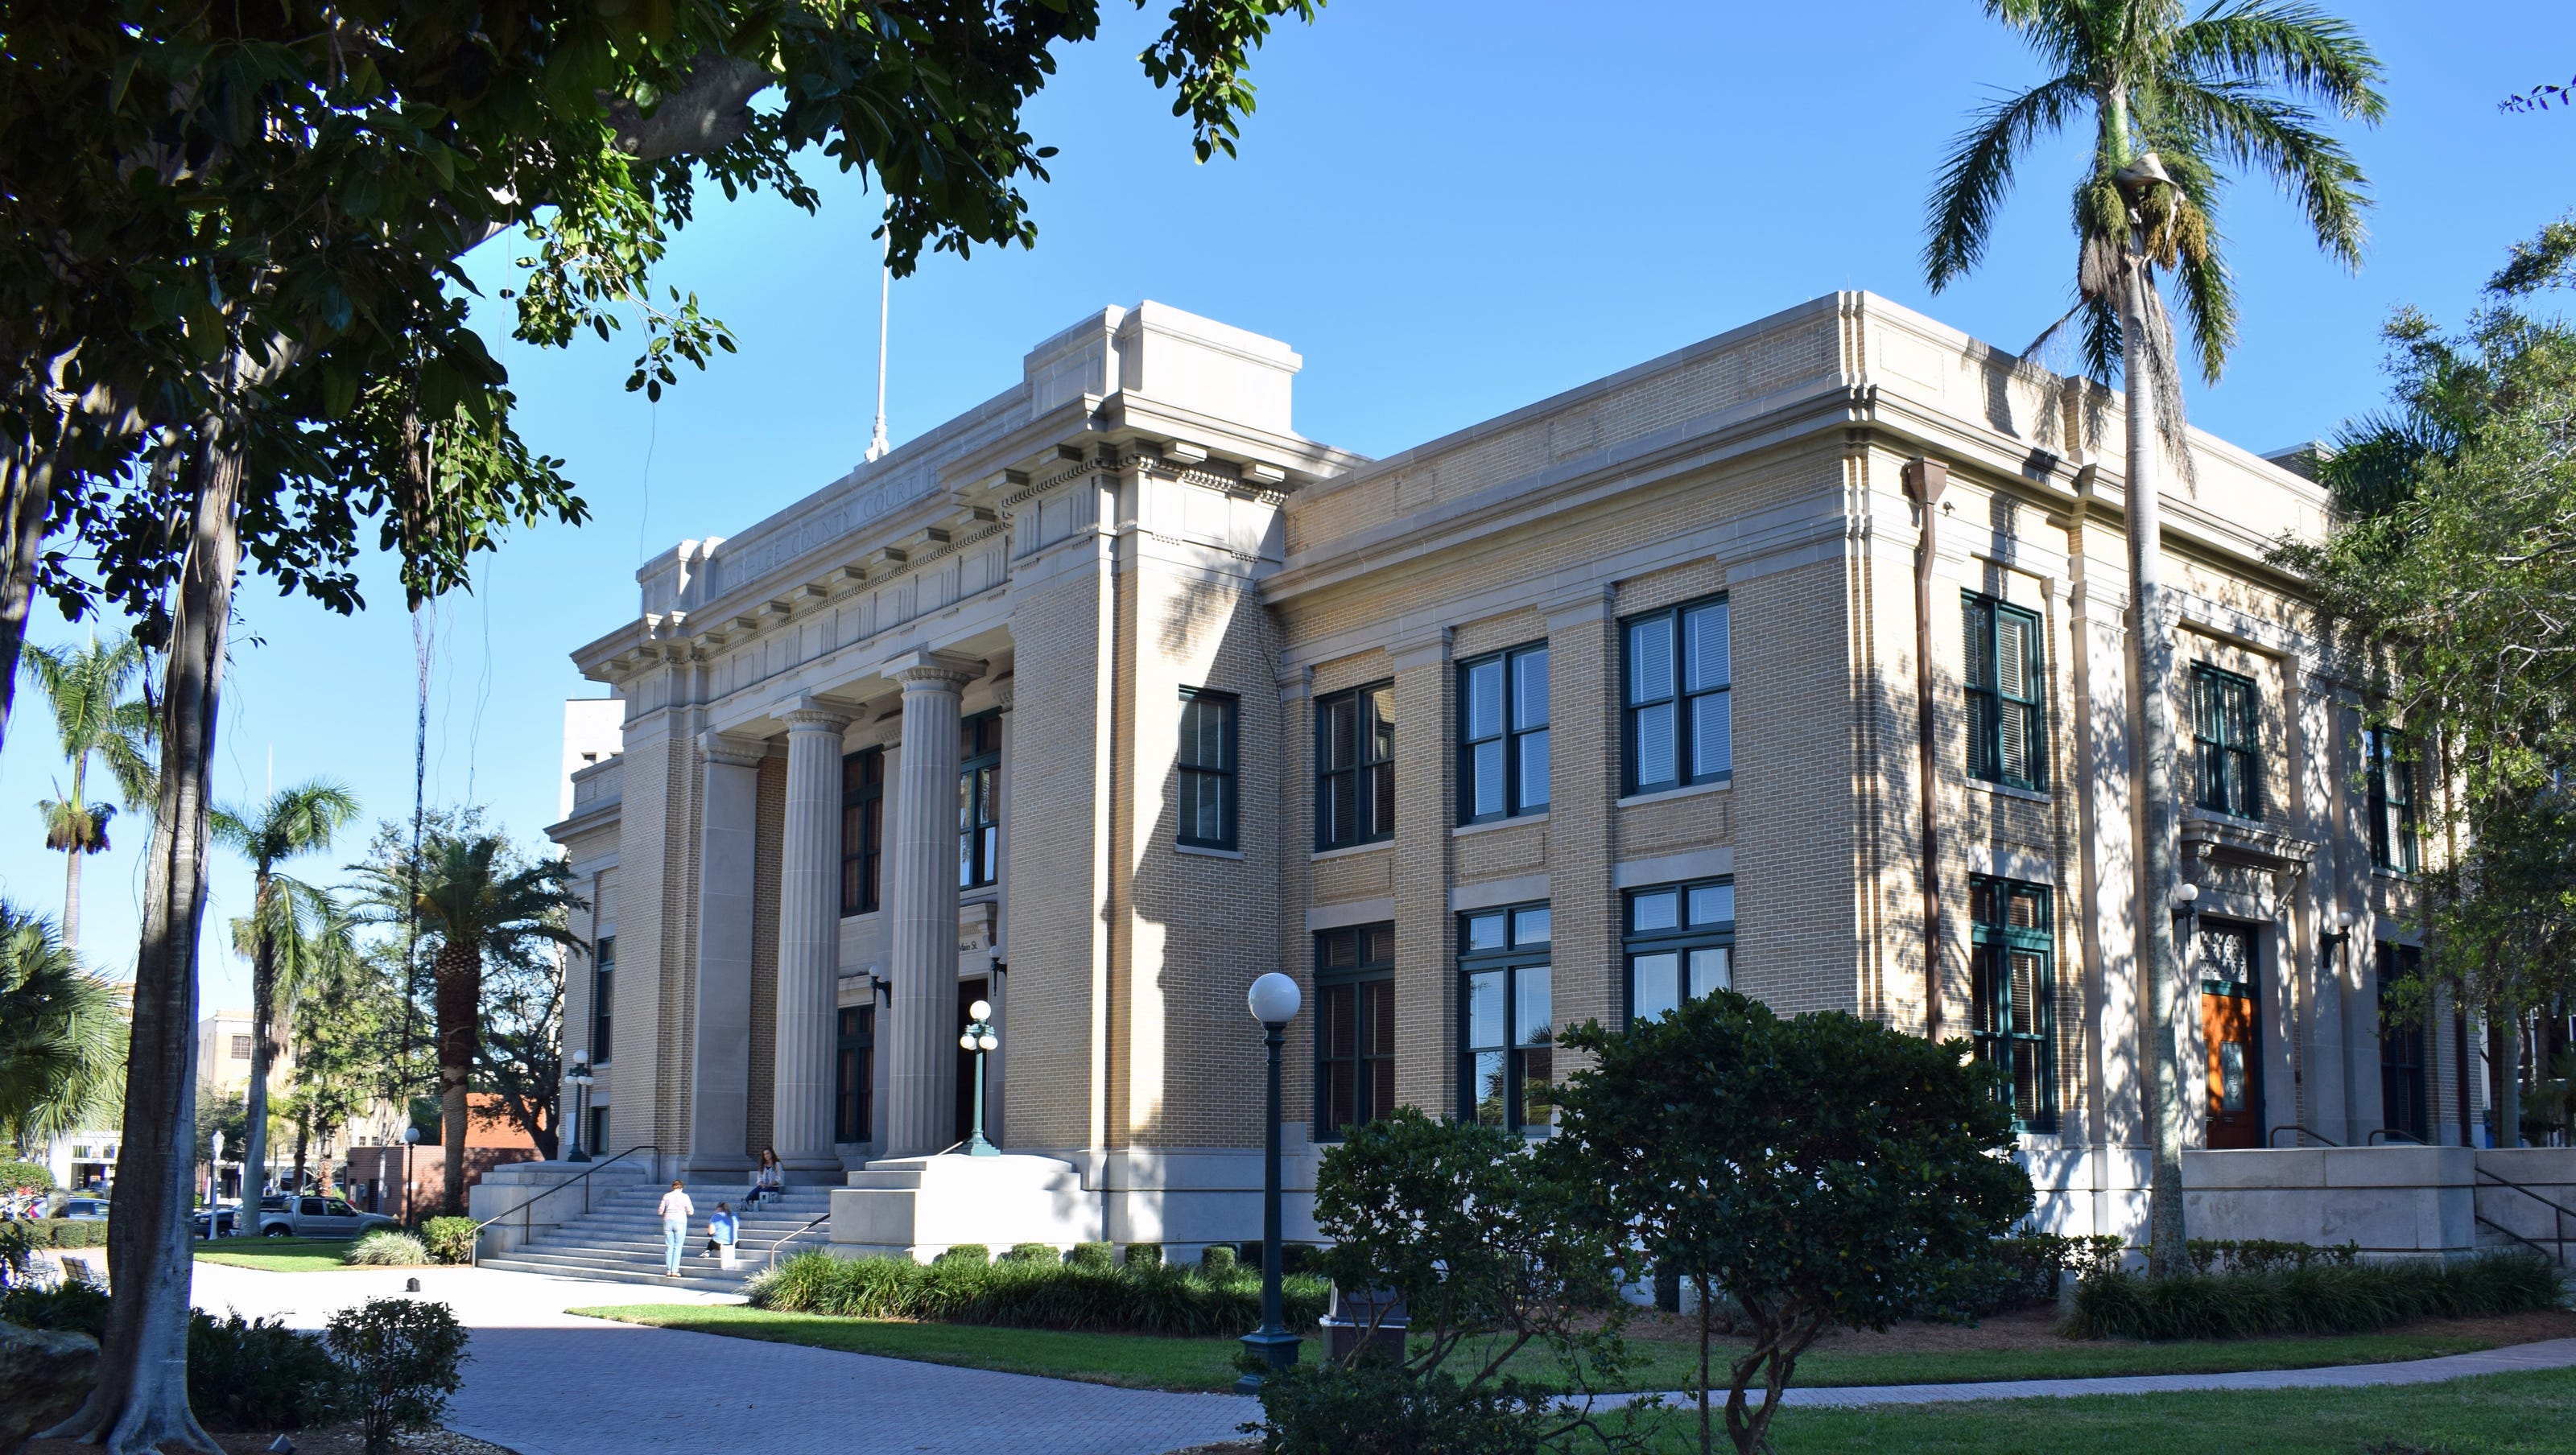 No. 80: Old Lee County Courthouse, 1915, Fort Myers